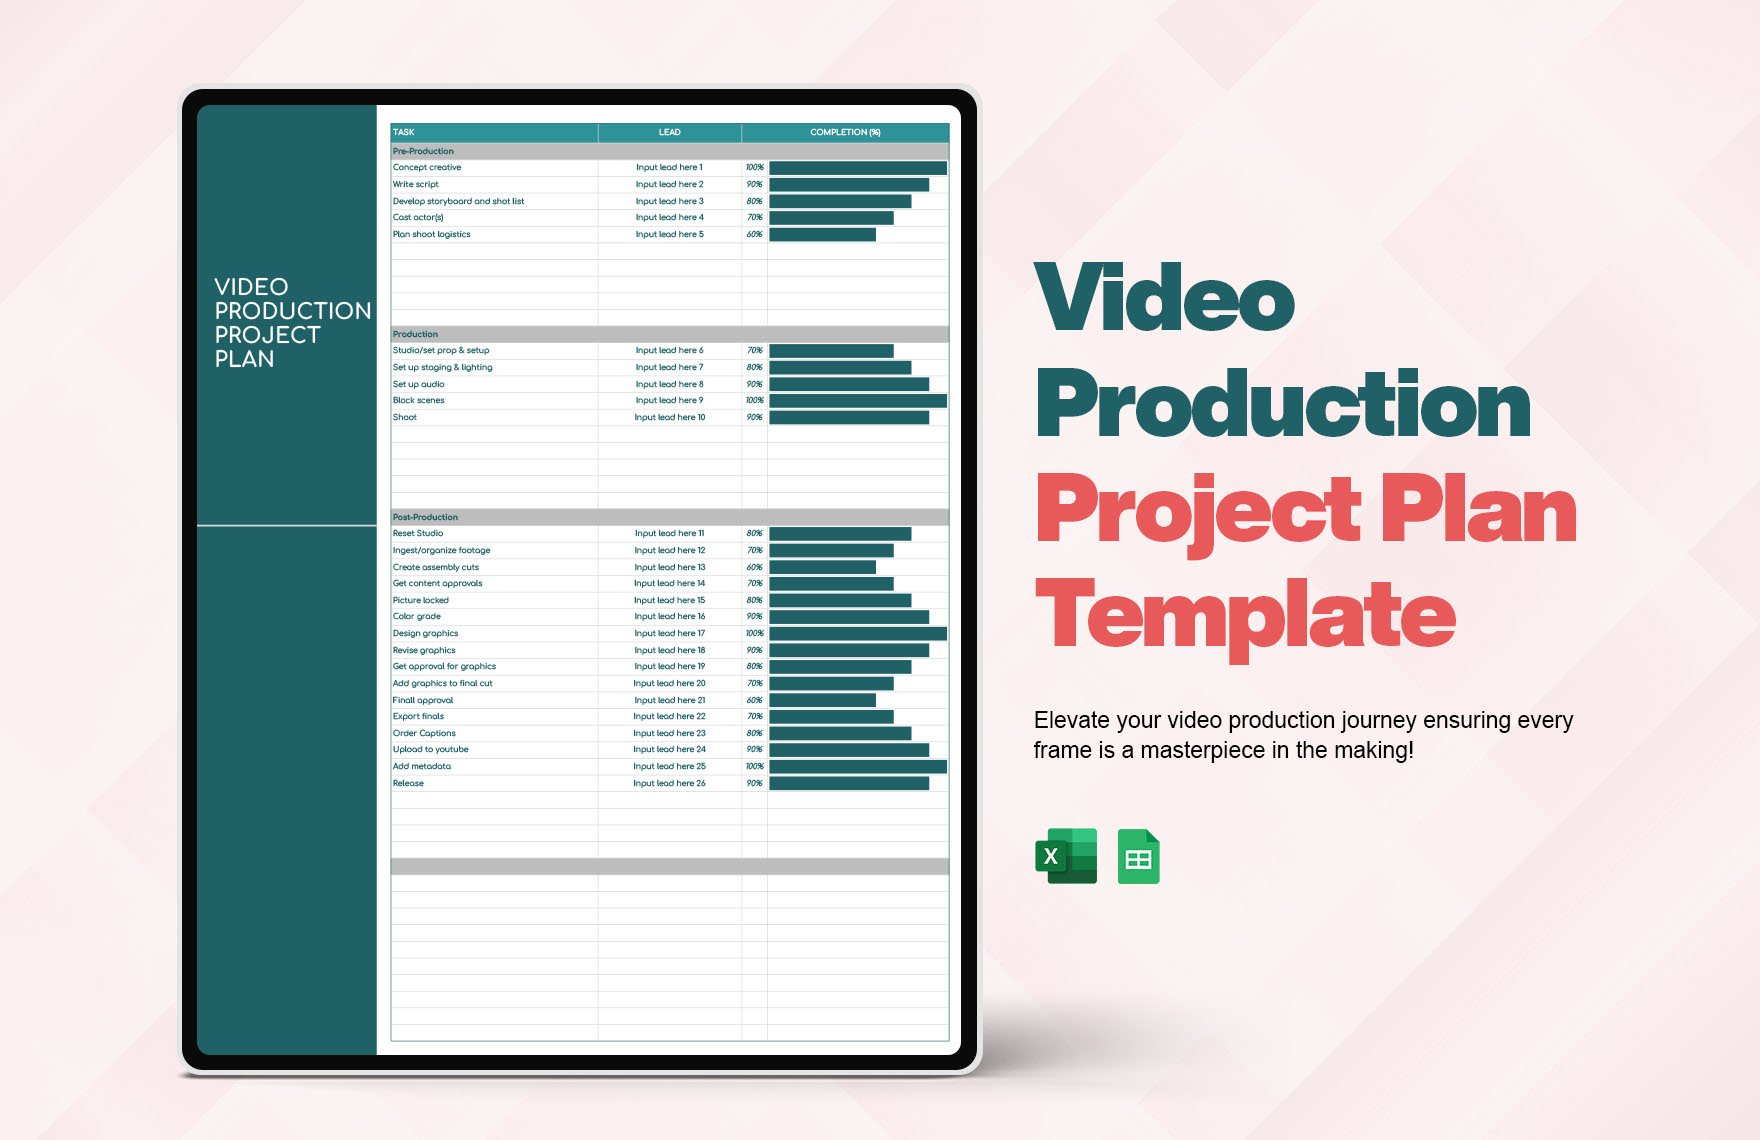 Video Production Project Plan Template